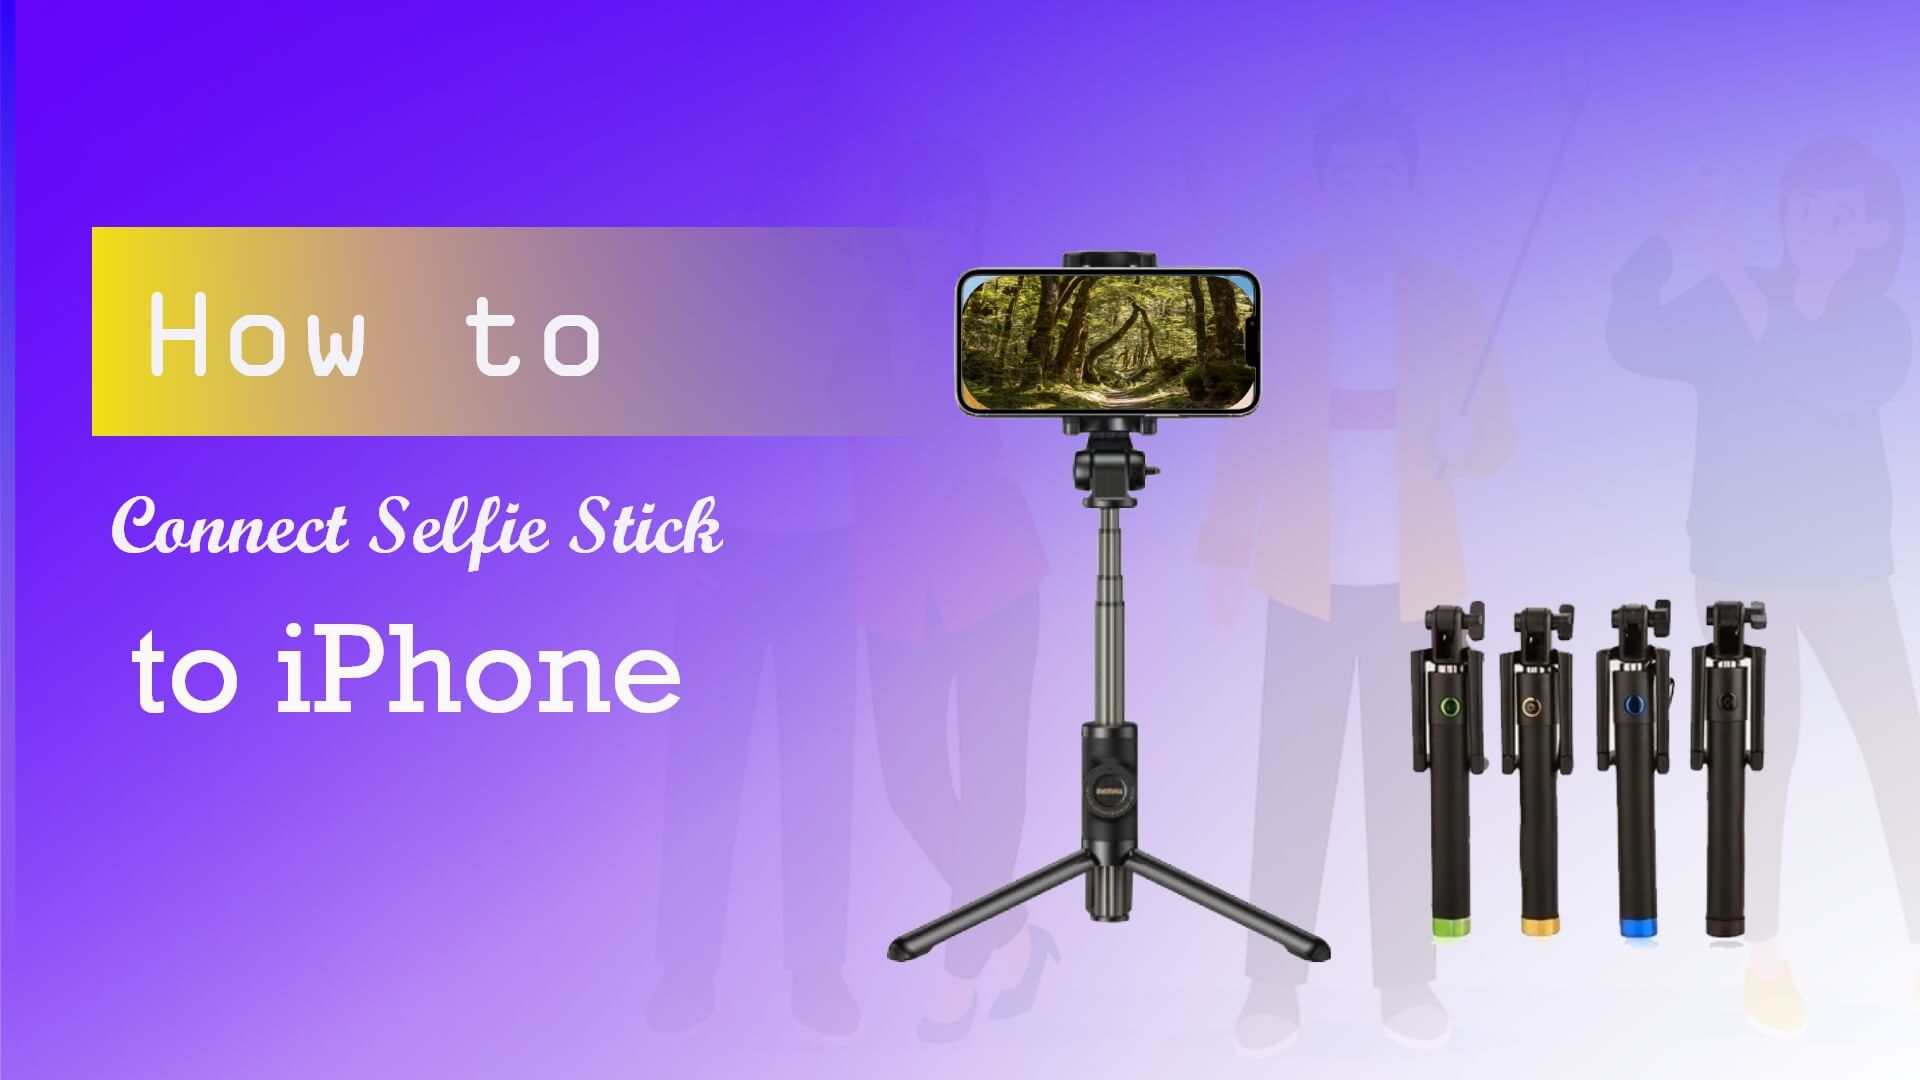 How to Connect Selfie Stick to iPhone